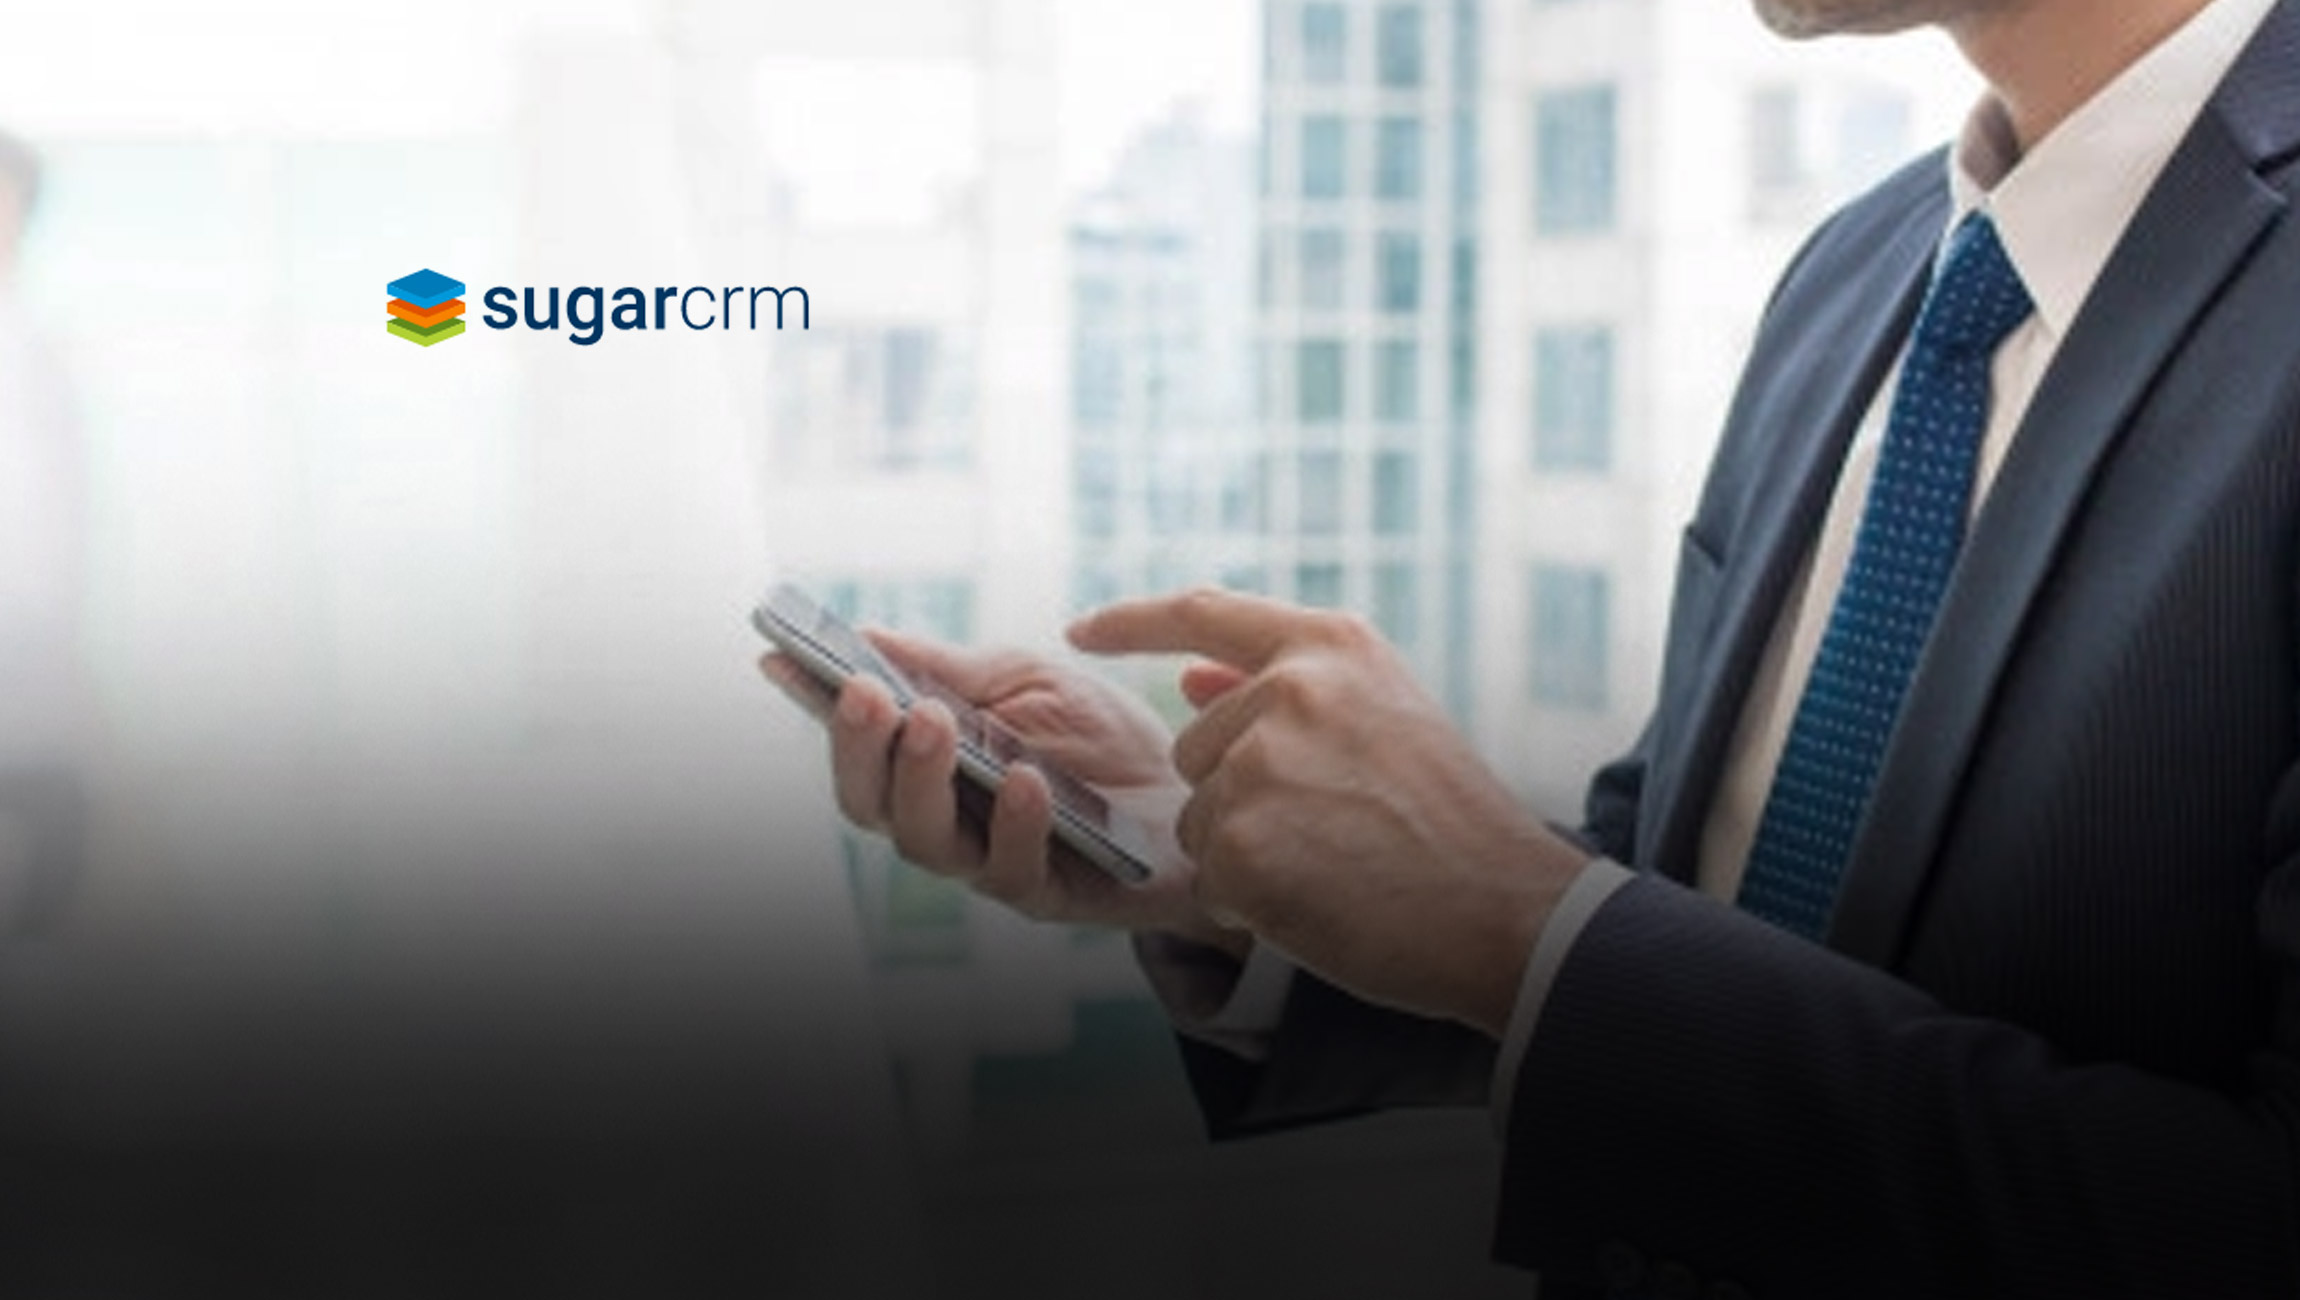 SugarCRM Brings Companies Cloud-Based Customer Experience (CX) Solutions on AWS